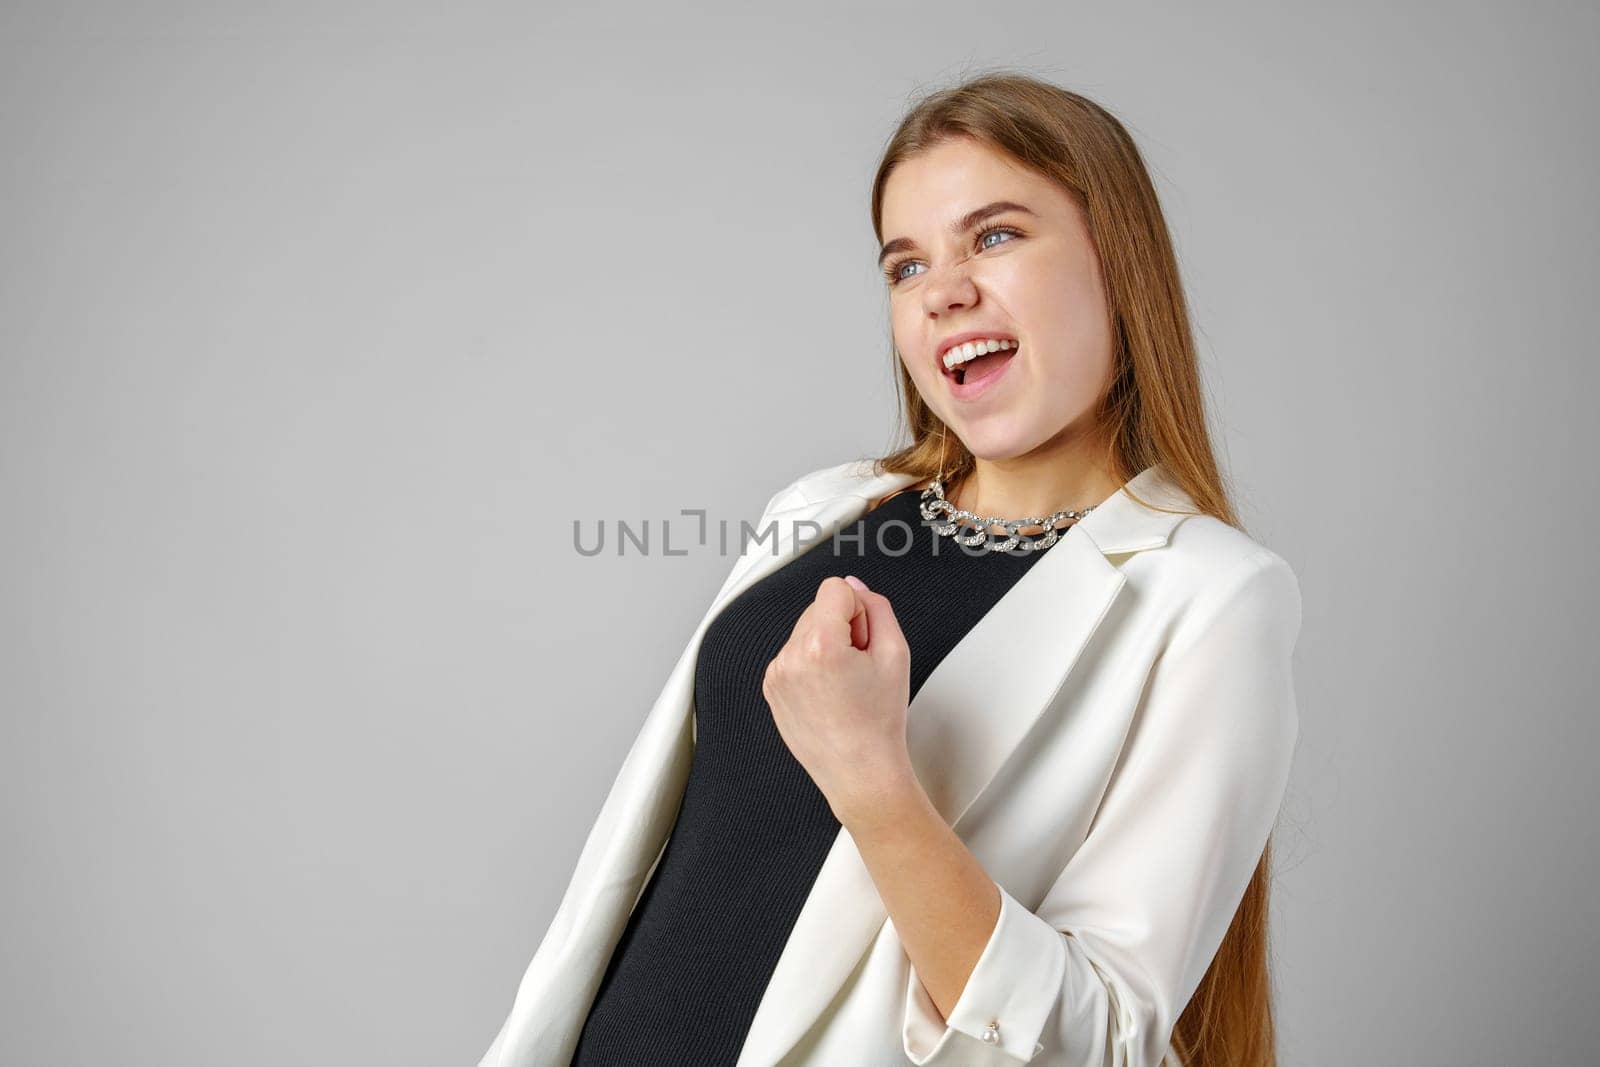 Confident Young Businesswoman Flexing Muscles in Smart Casual Attire Against Grey Background close up